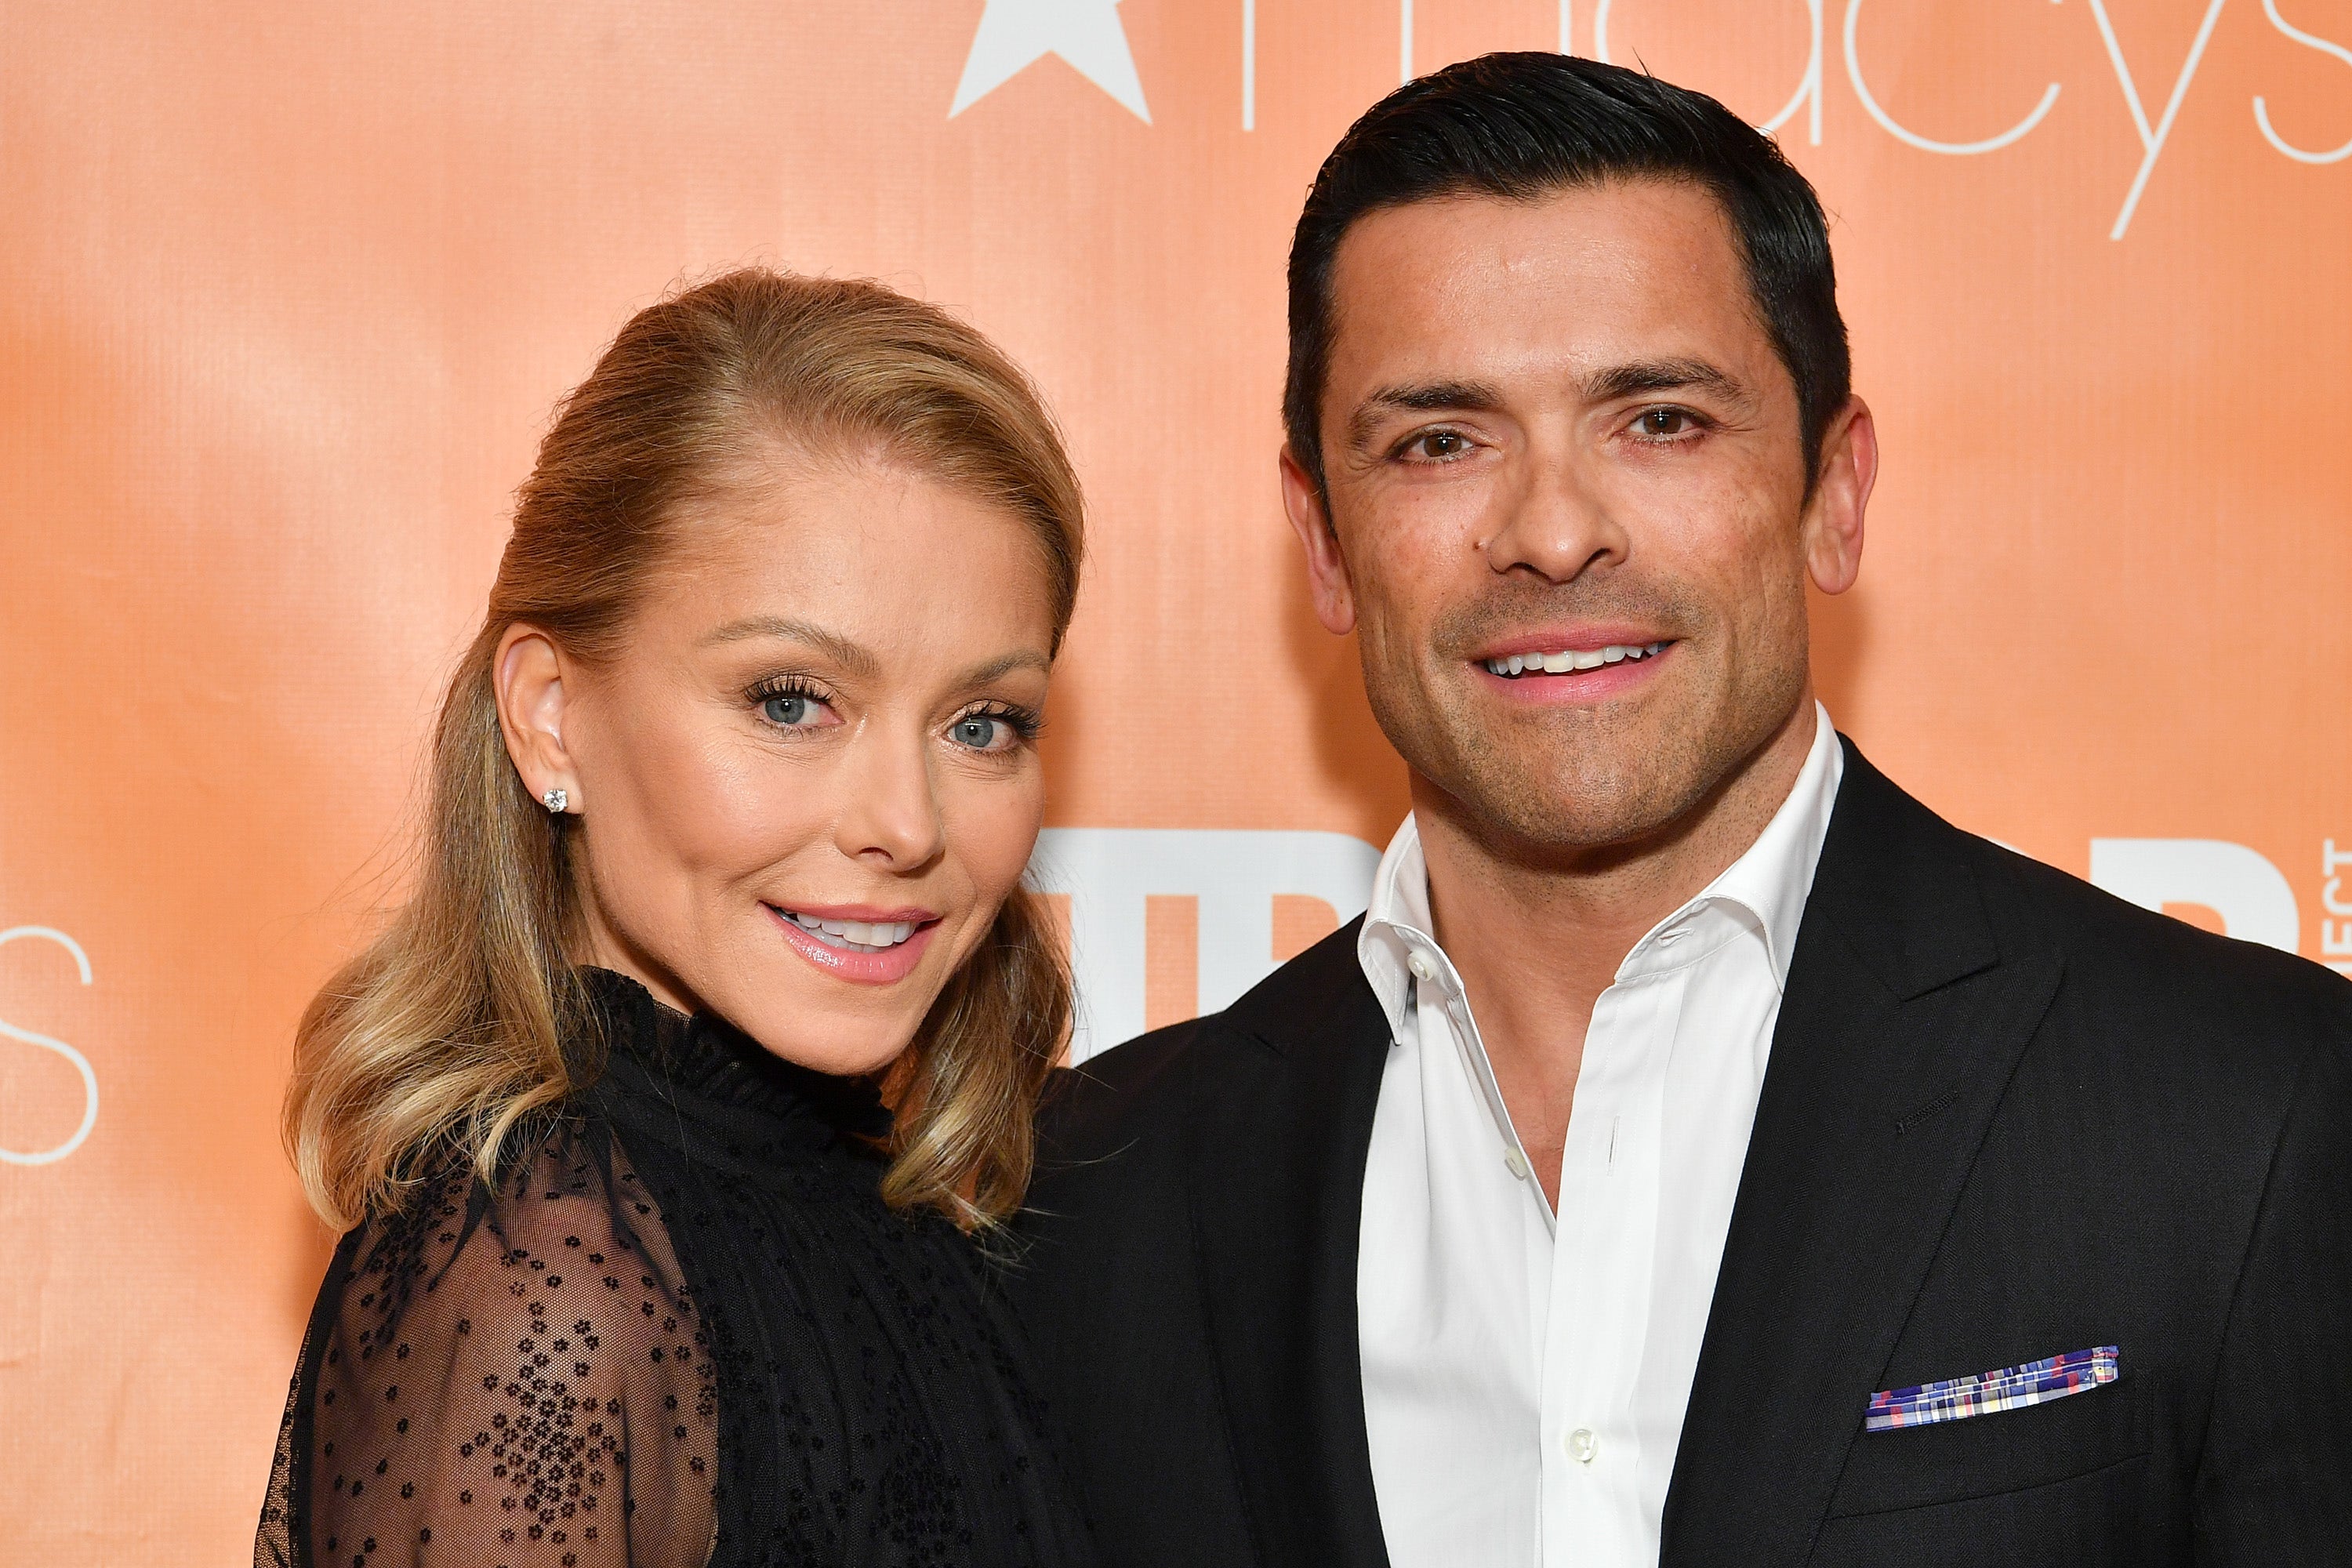 Kelly Ripa smiles in a black dress next to her husband Mark Consuelos in a white button down and black suit